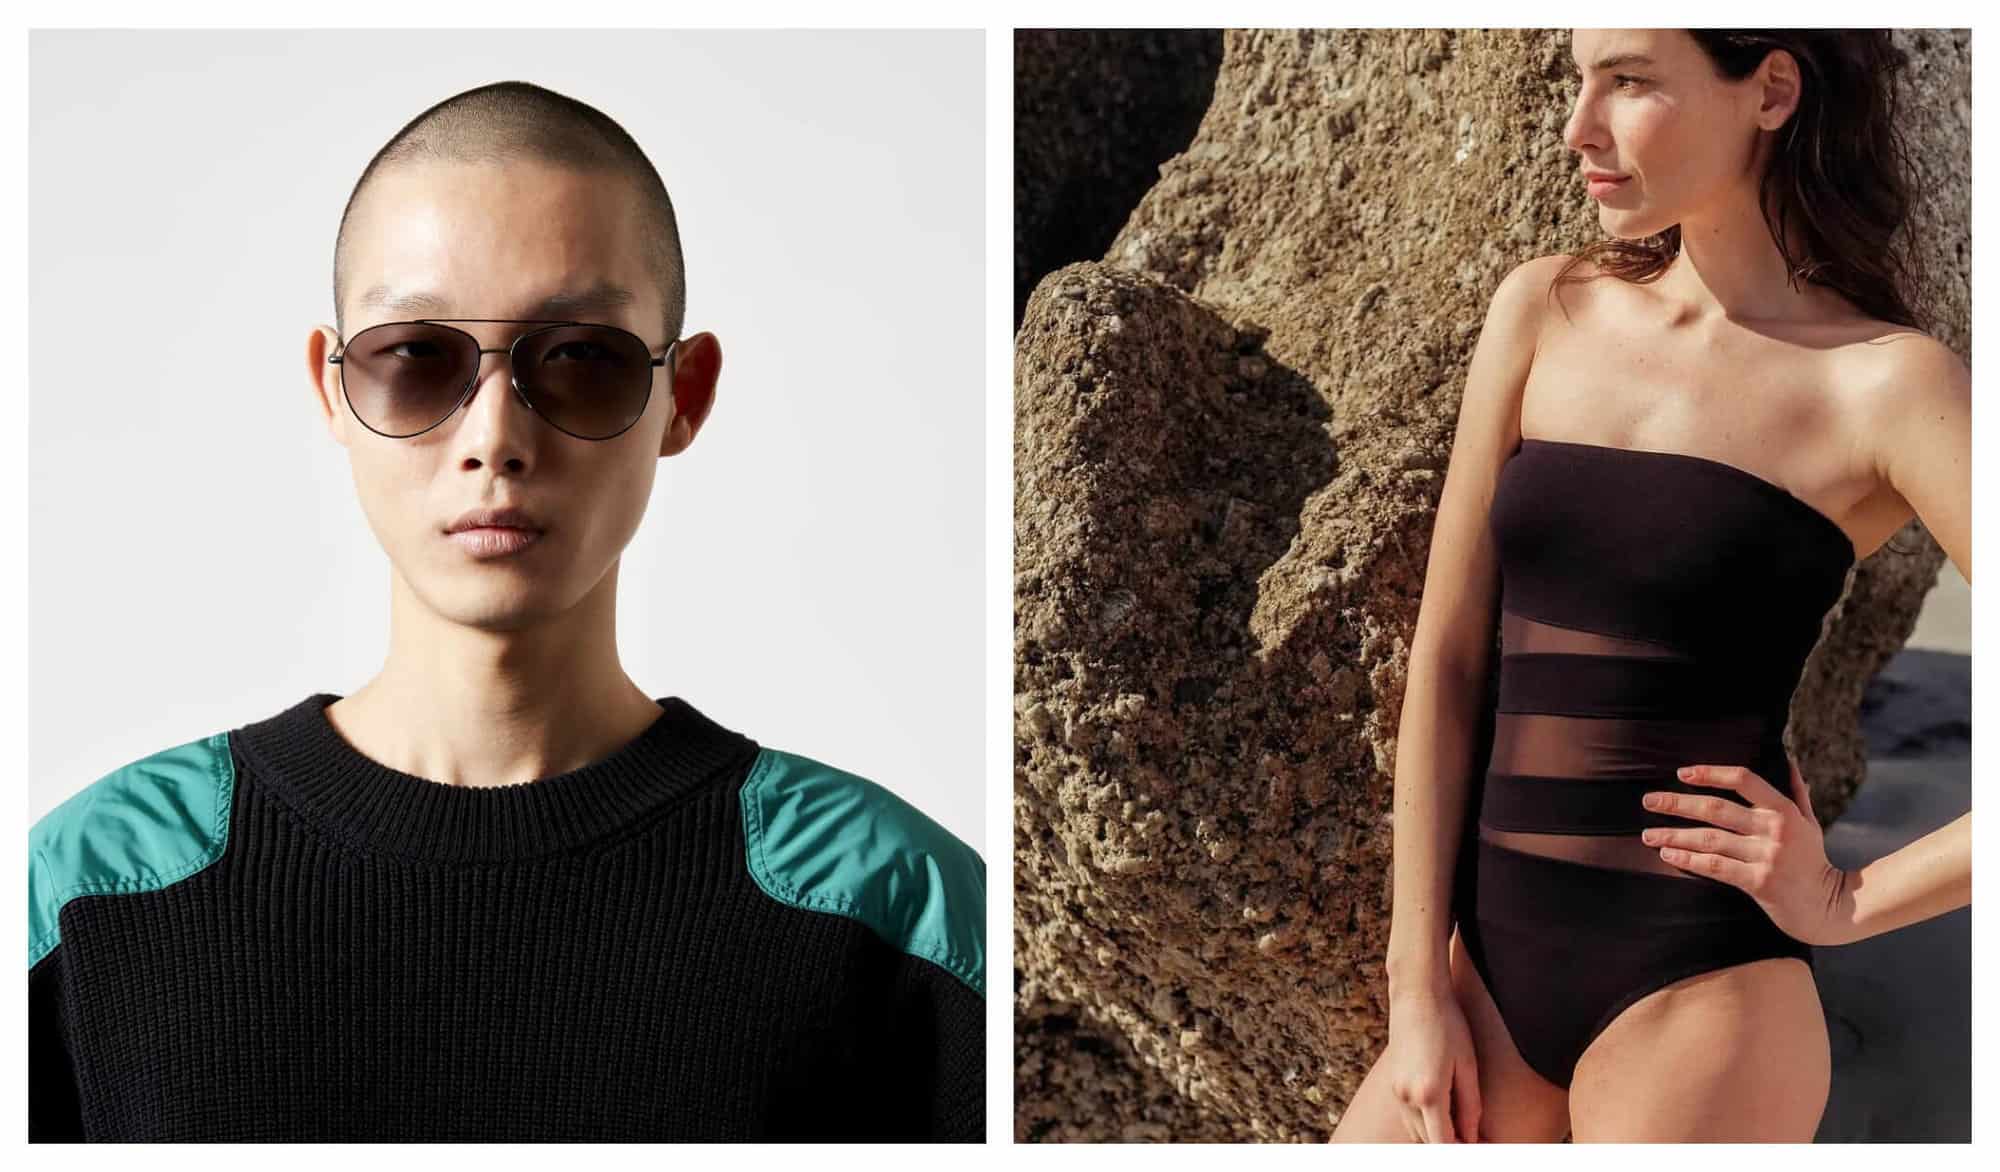 Left: A man with a shaved head in a black and blue top wears a black sunglasses. Right: A woman wears a black swimsuit as she stands behind a big rock.